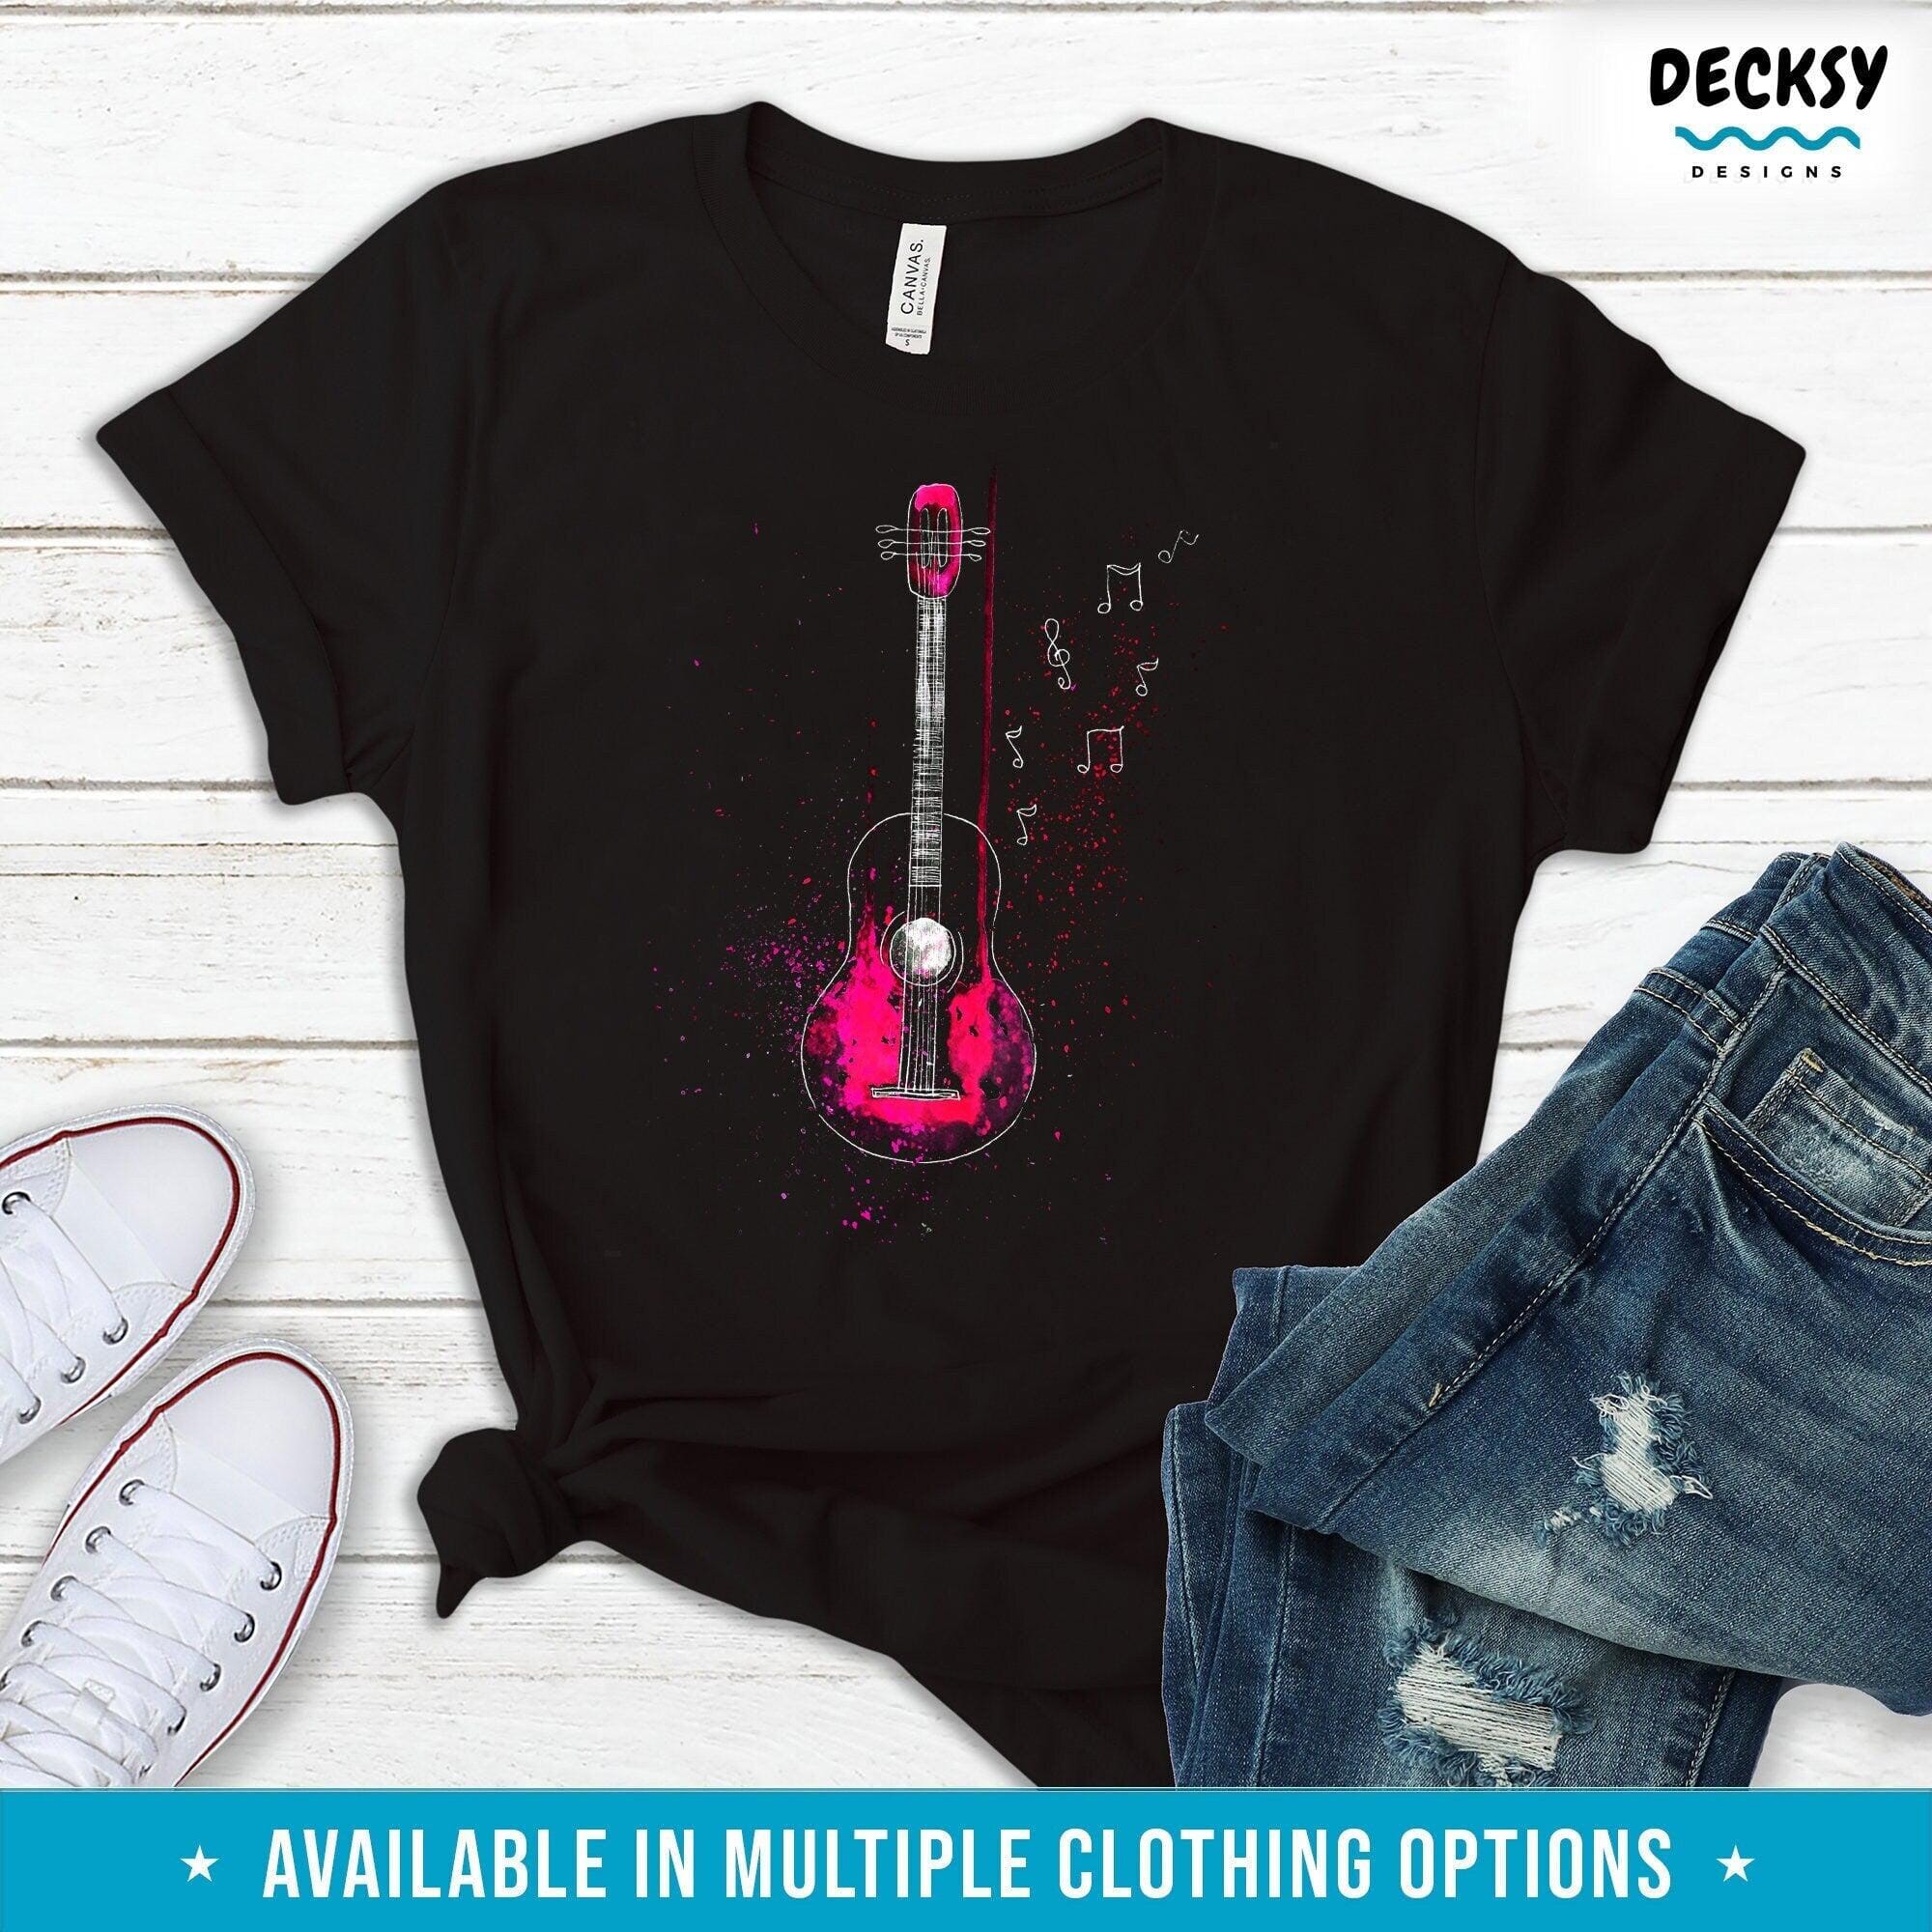 Guitar Shirt, Gift For Guitarist-Clothing:Gender-Neutral Adult Clothing:Tops & Tees:T-shirts:Graphic Tees-DecksyDesigns